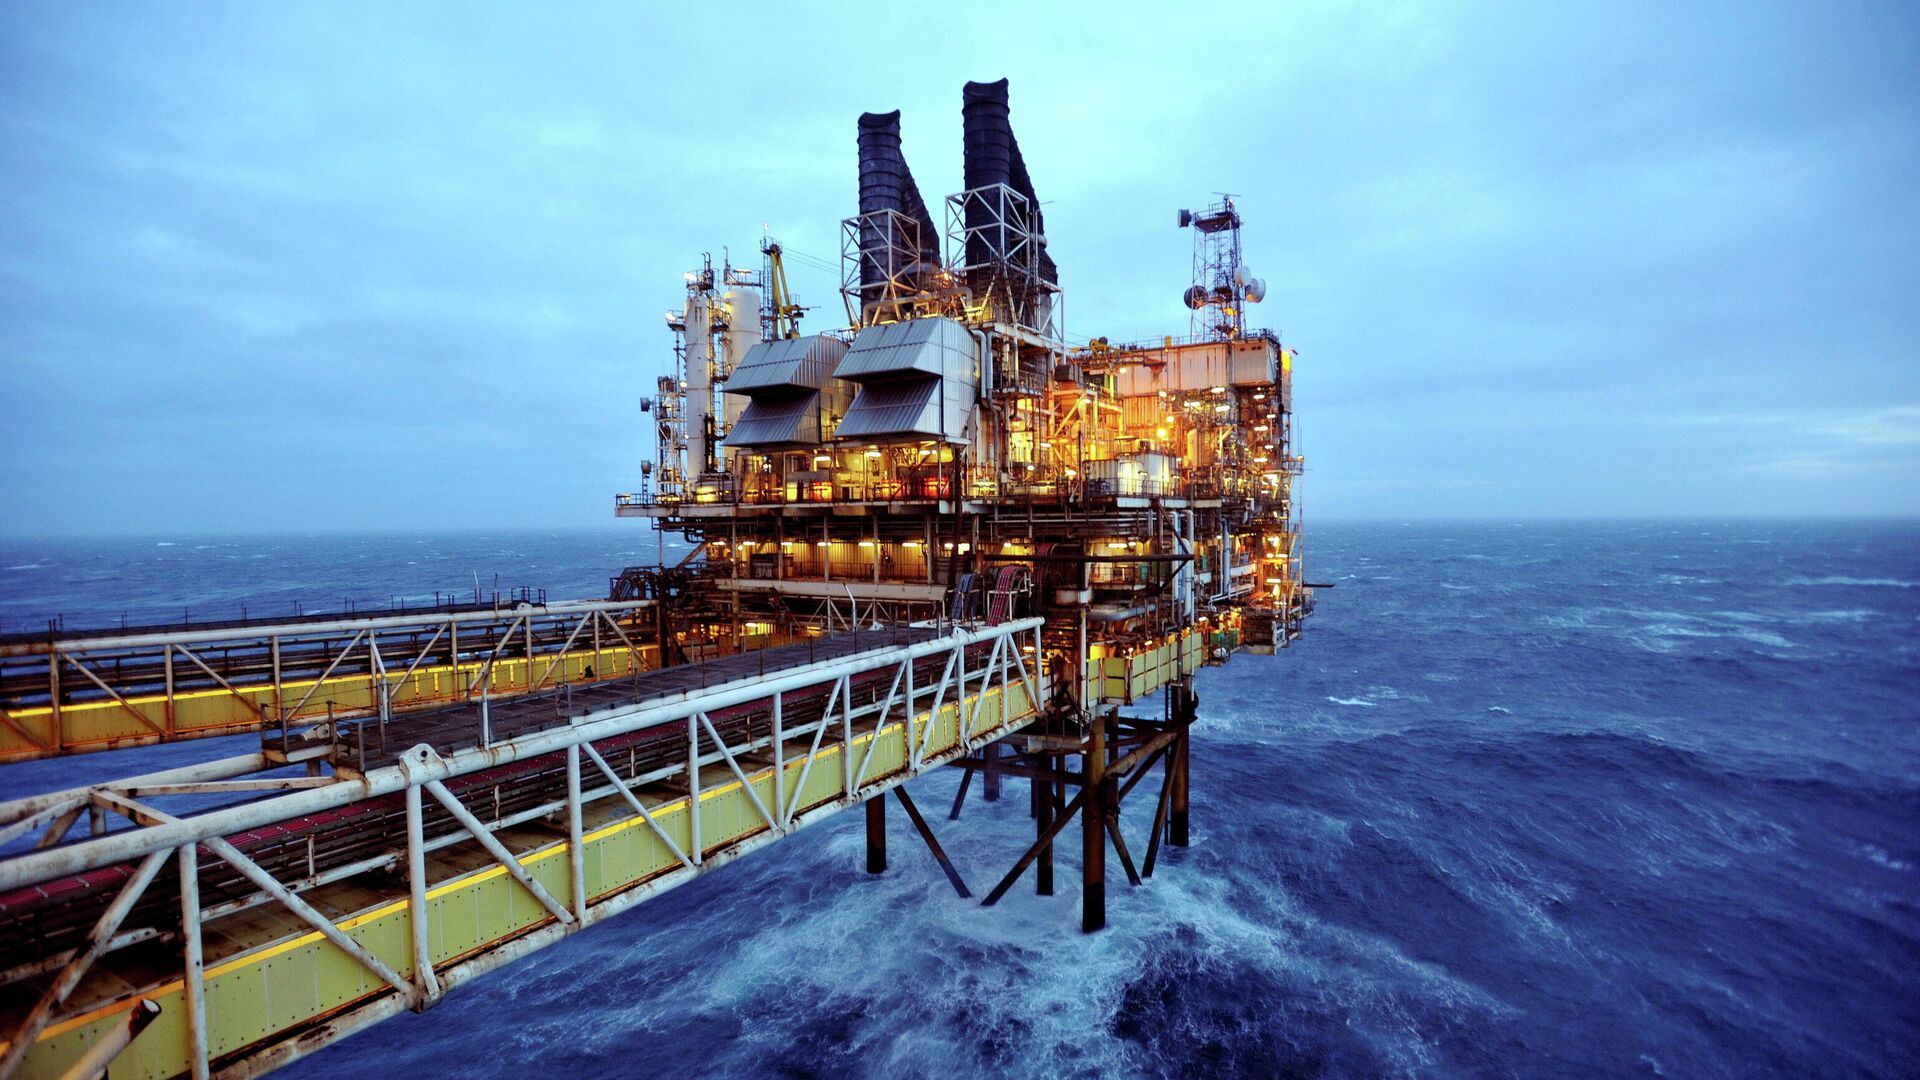 A section of the BP Eastern Trough Area Project (ETAP) oil platform is seen in the North Sea, about 100 miles east of Aberdeen in Scotland, February 24, 2014 - Sputnik International, 1920, 07.10.2021